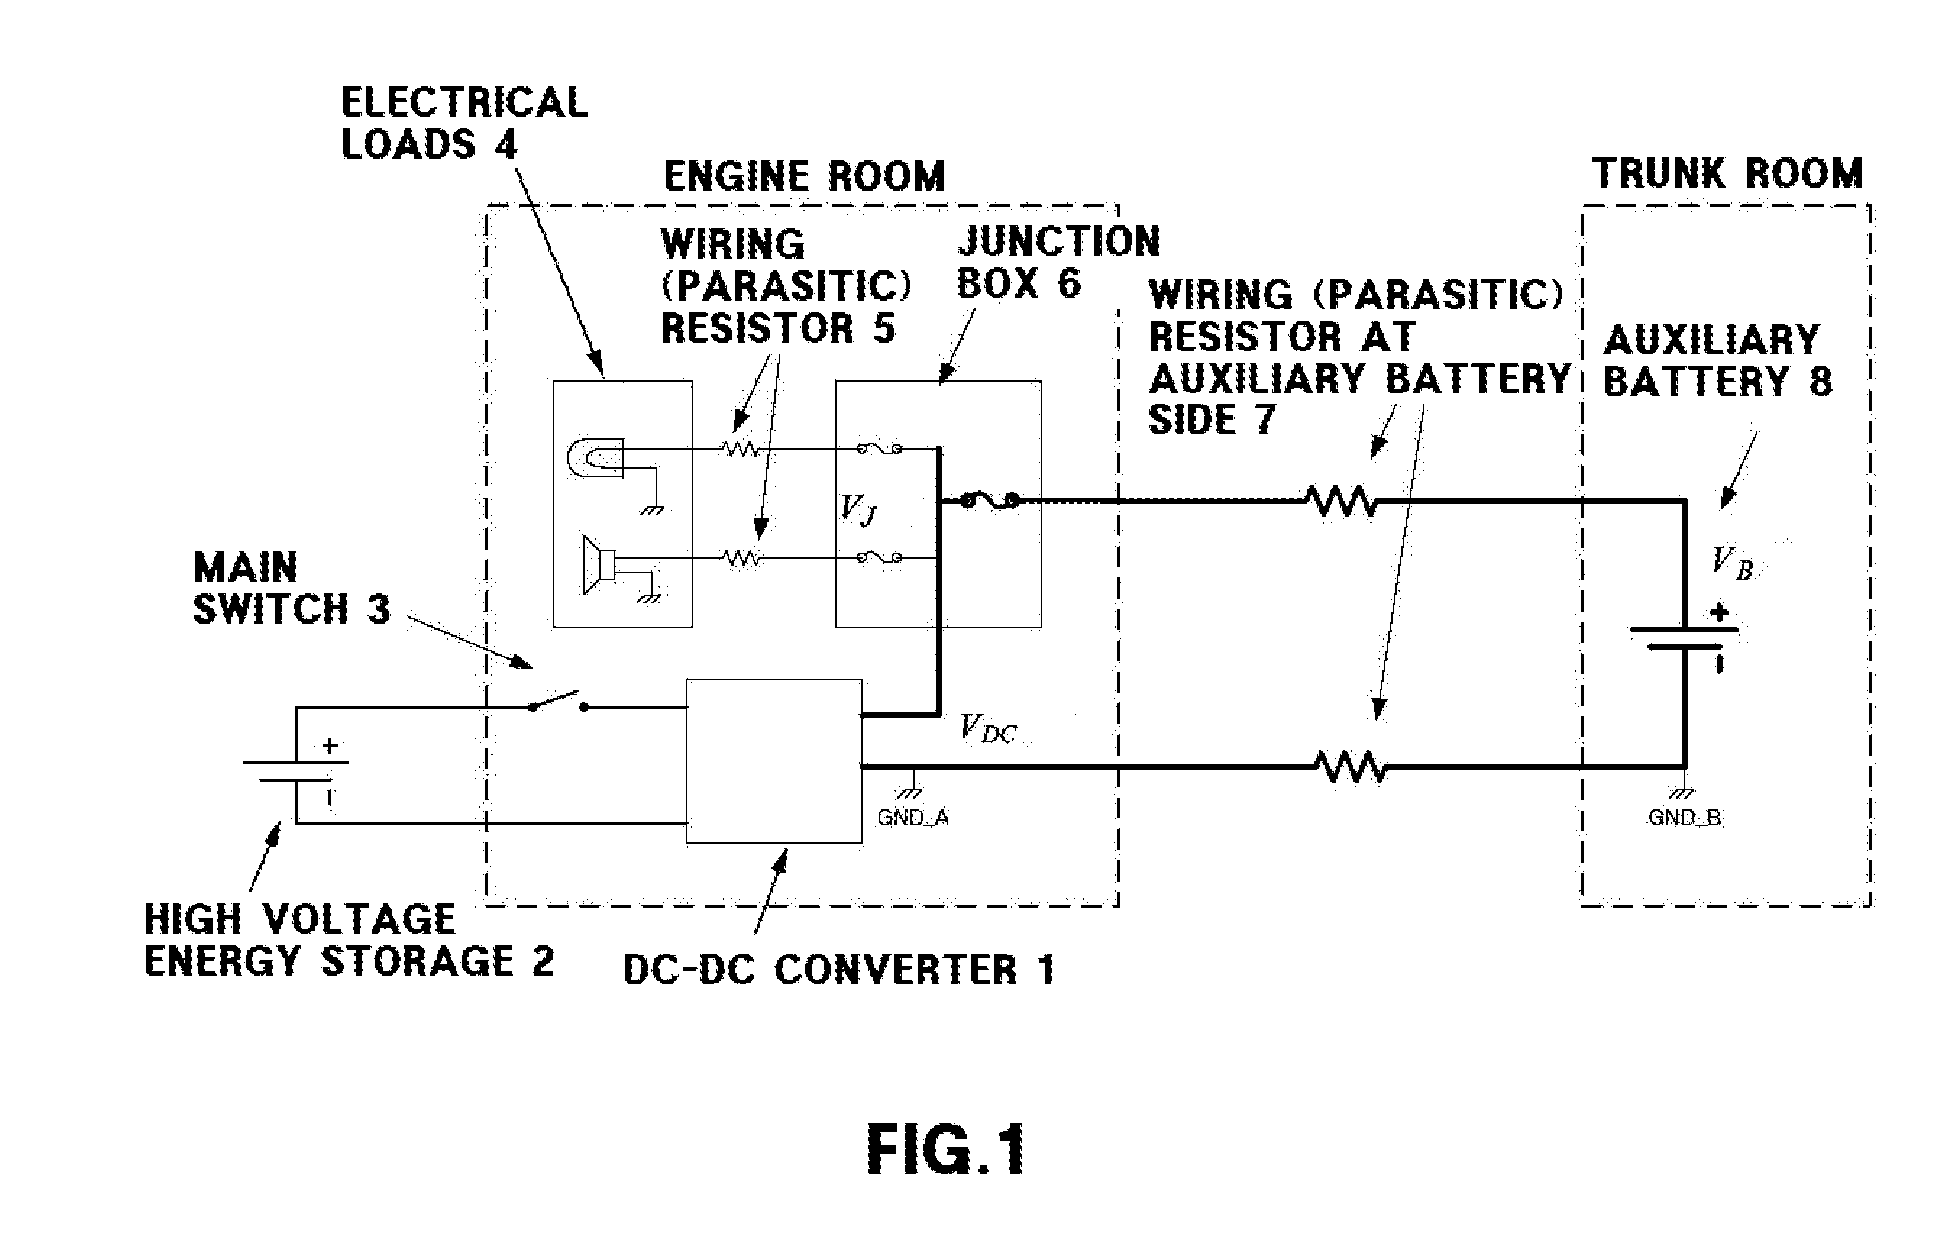 Method for controlling charging voltage of 12v auxiliary battery for hybrid vehicle